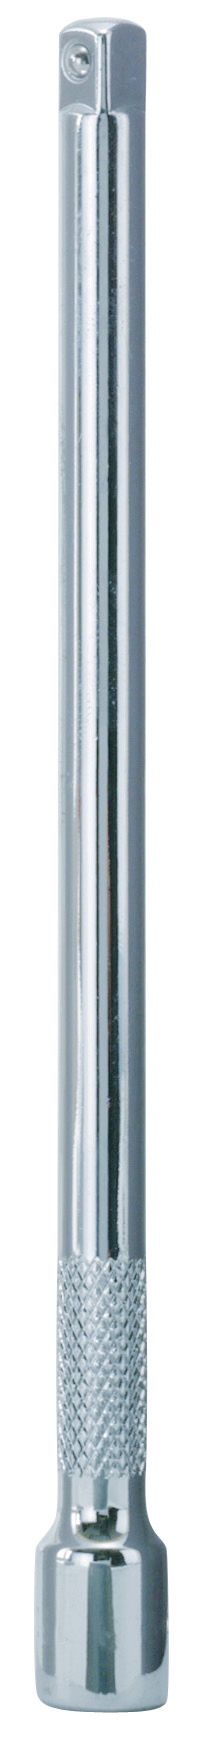 Armstrong Tools 1/4 in. Drive Extension Bar, 10 in. Long